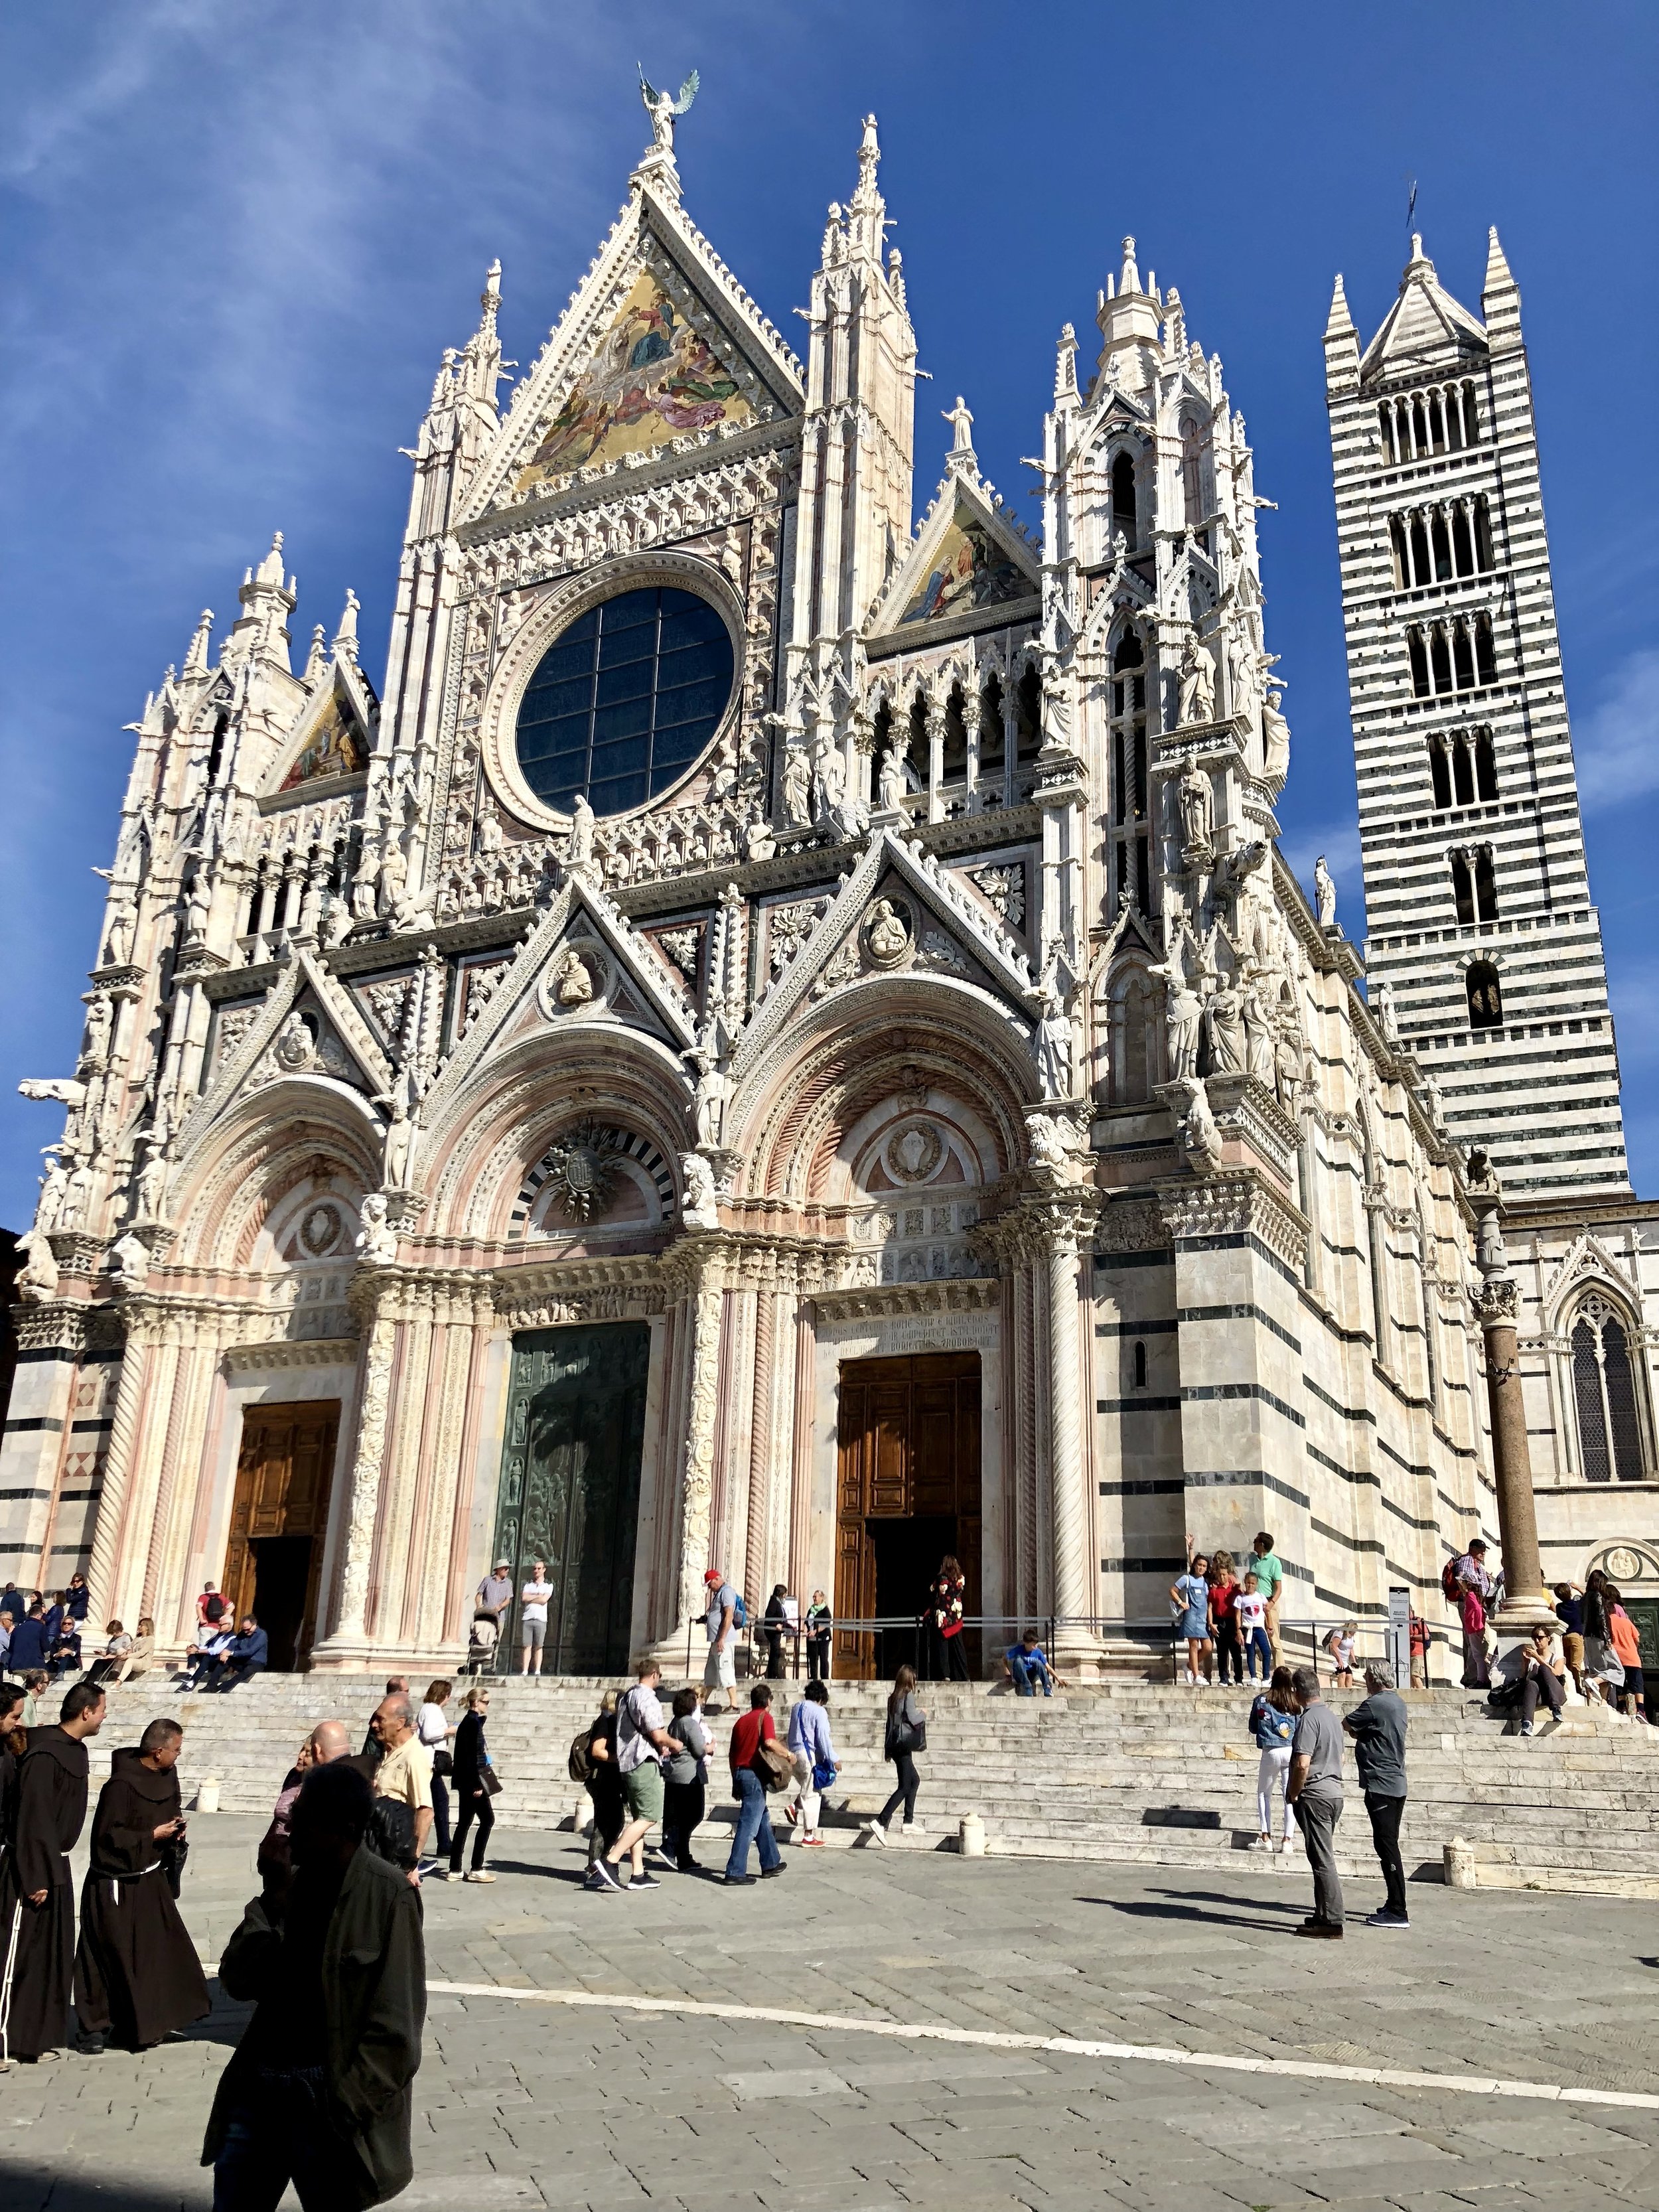  Siena cathedral and bell tower.  